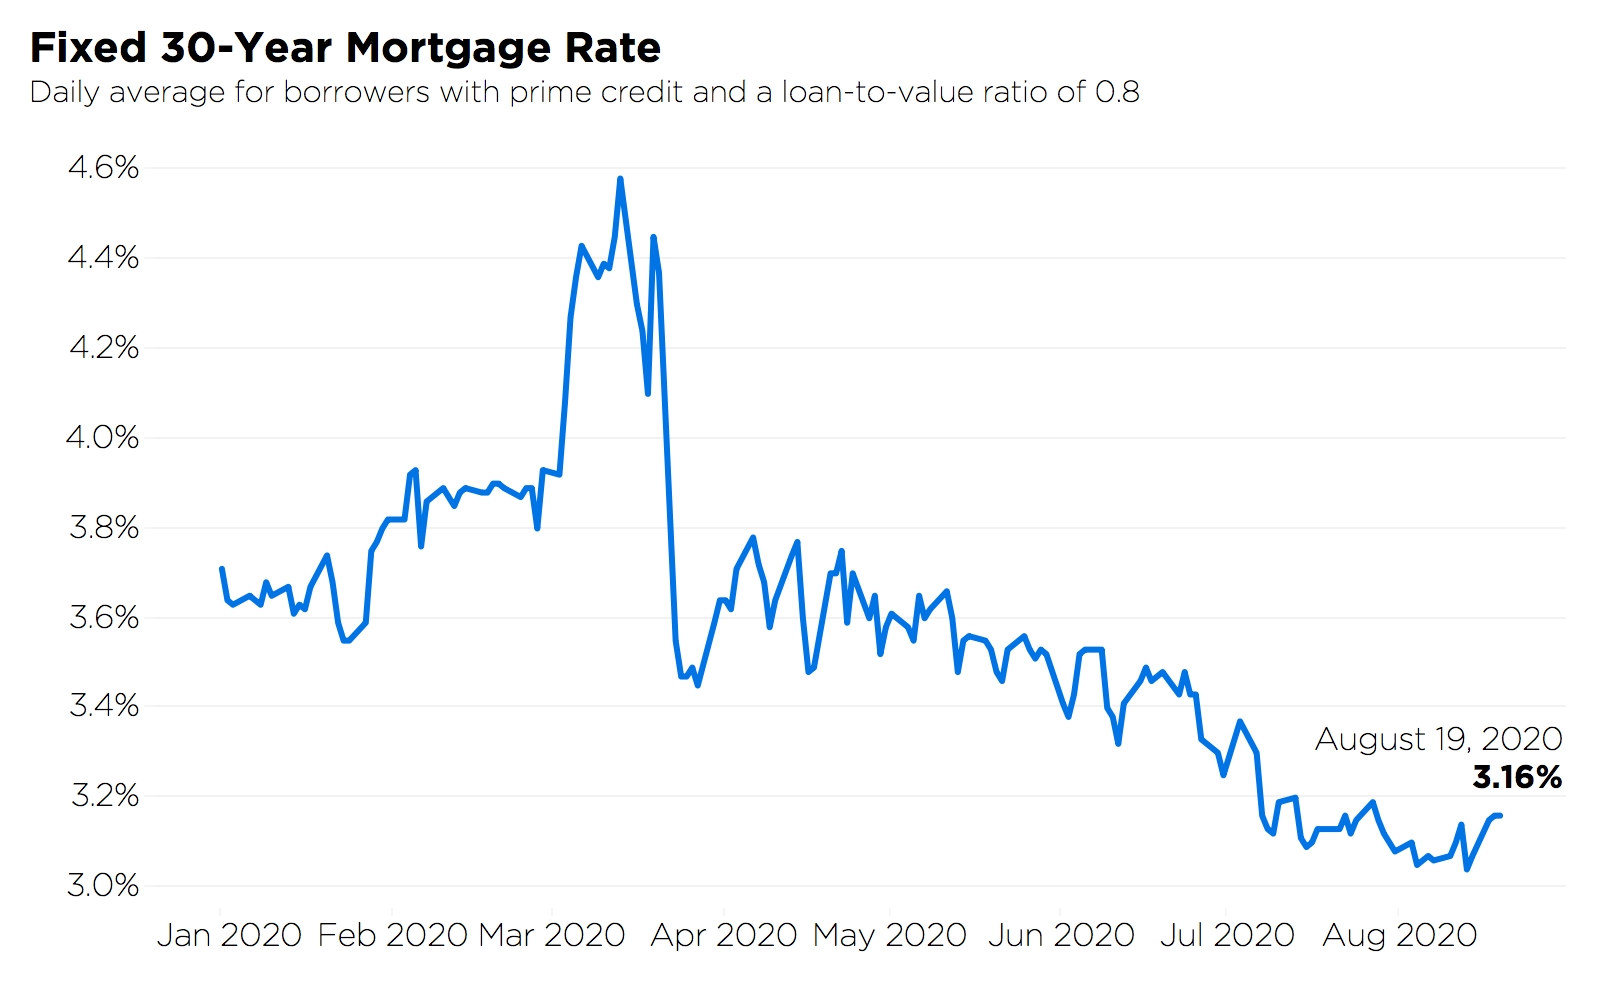 line chart of fixed 30 year mortgage rates from Jan 2020 to Aug 2020